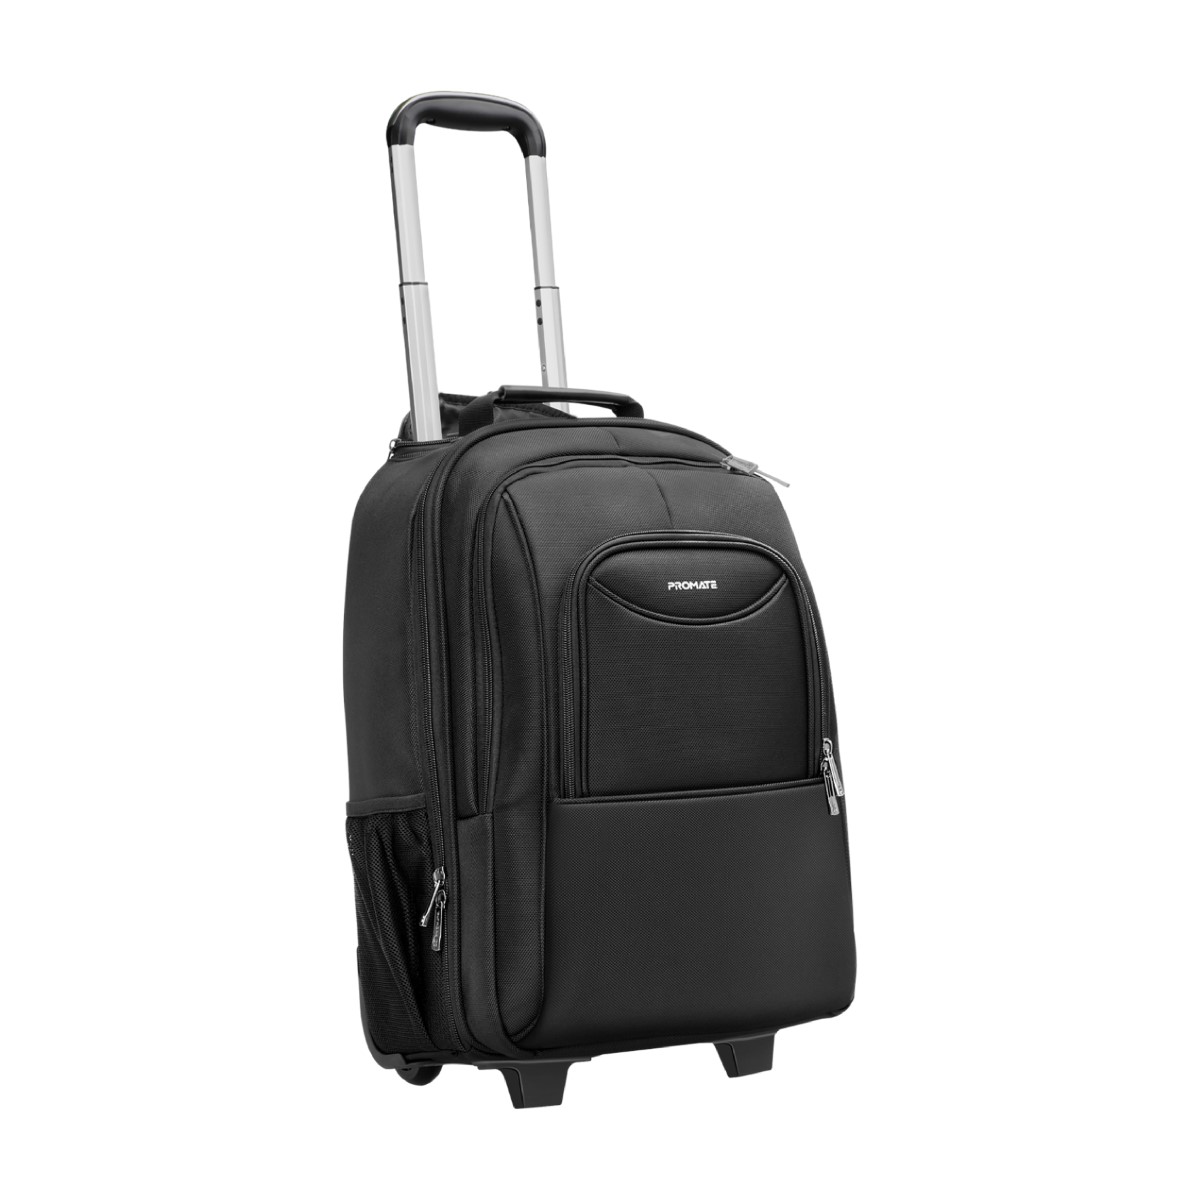 Promate Trolley Bag, Premium 2-in-1 Trolley Bag and Backpack with Secure Zippers, Side Pockets, Adjustable Straps, Water Resistance and In-Line Wheels for 16” Laptops, MacBooks, iPad, Dell XPS 13, Mogul-TR